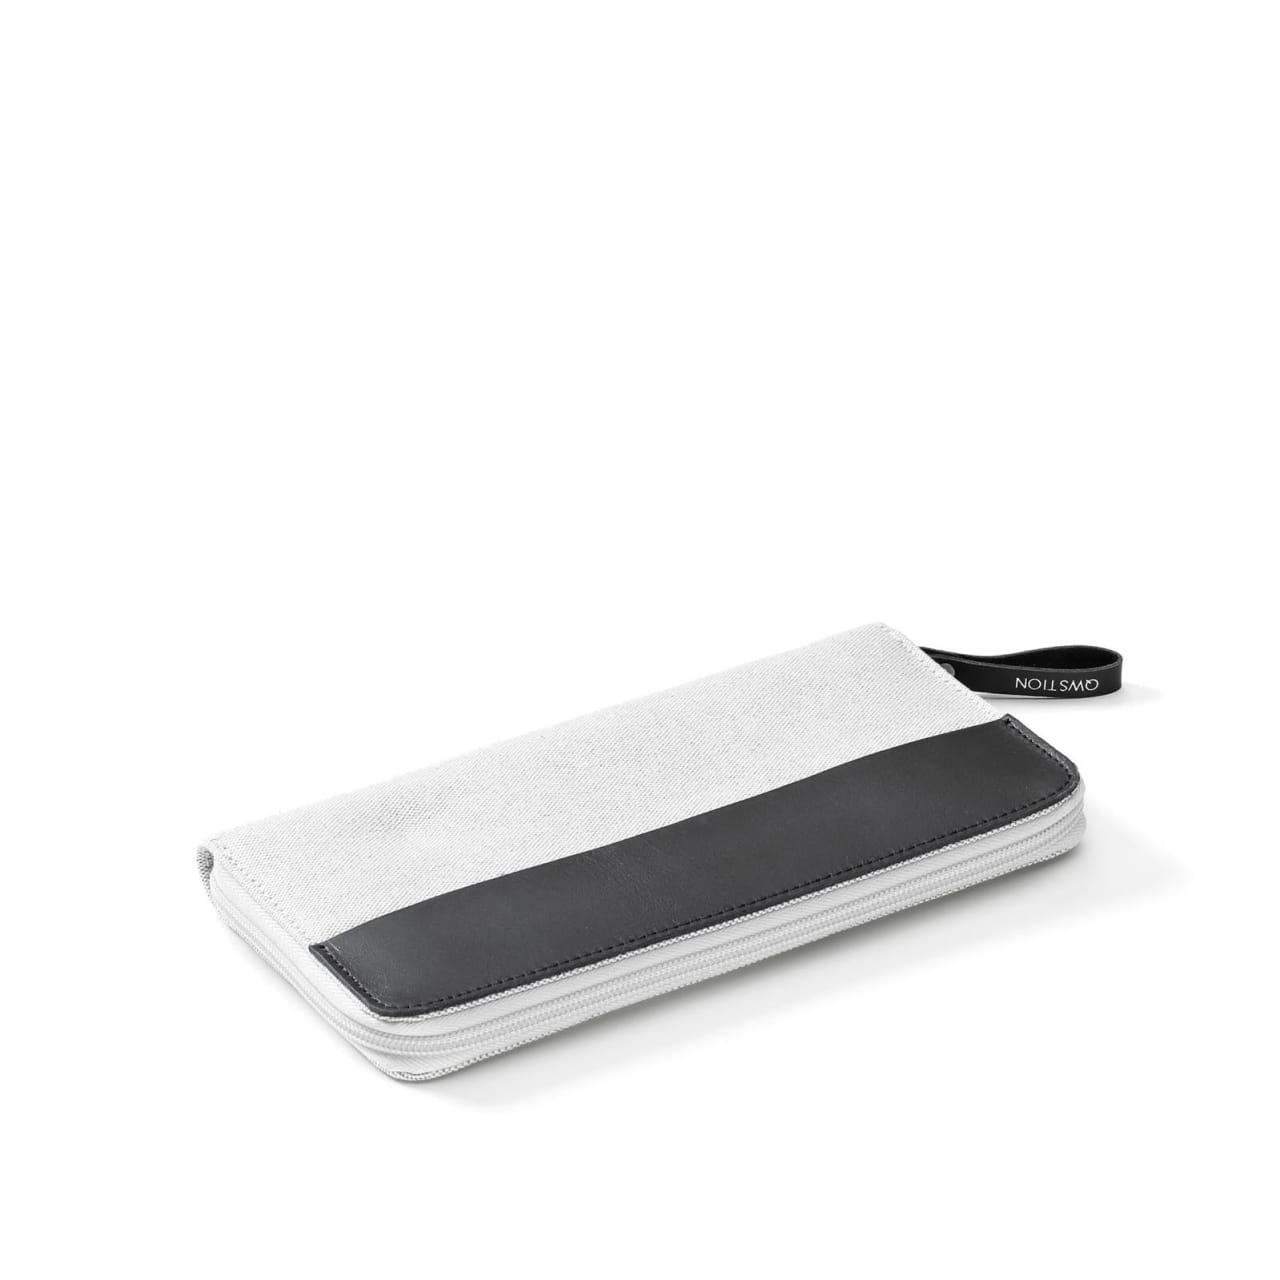 Front of carry clutch with white canvas body, black zipper pouch, and handle.